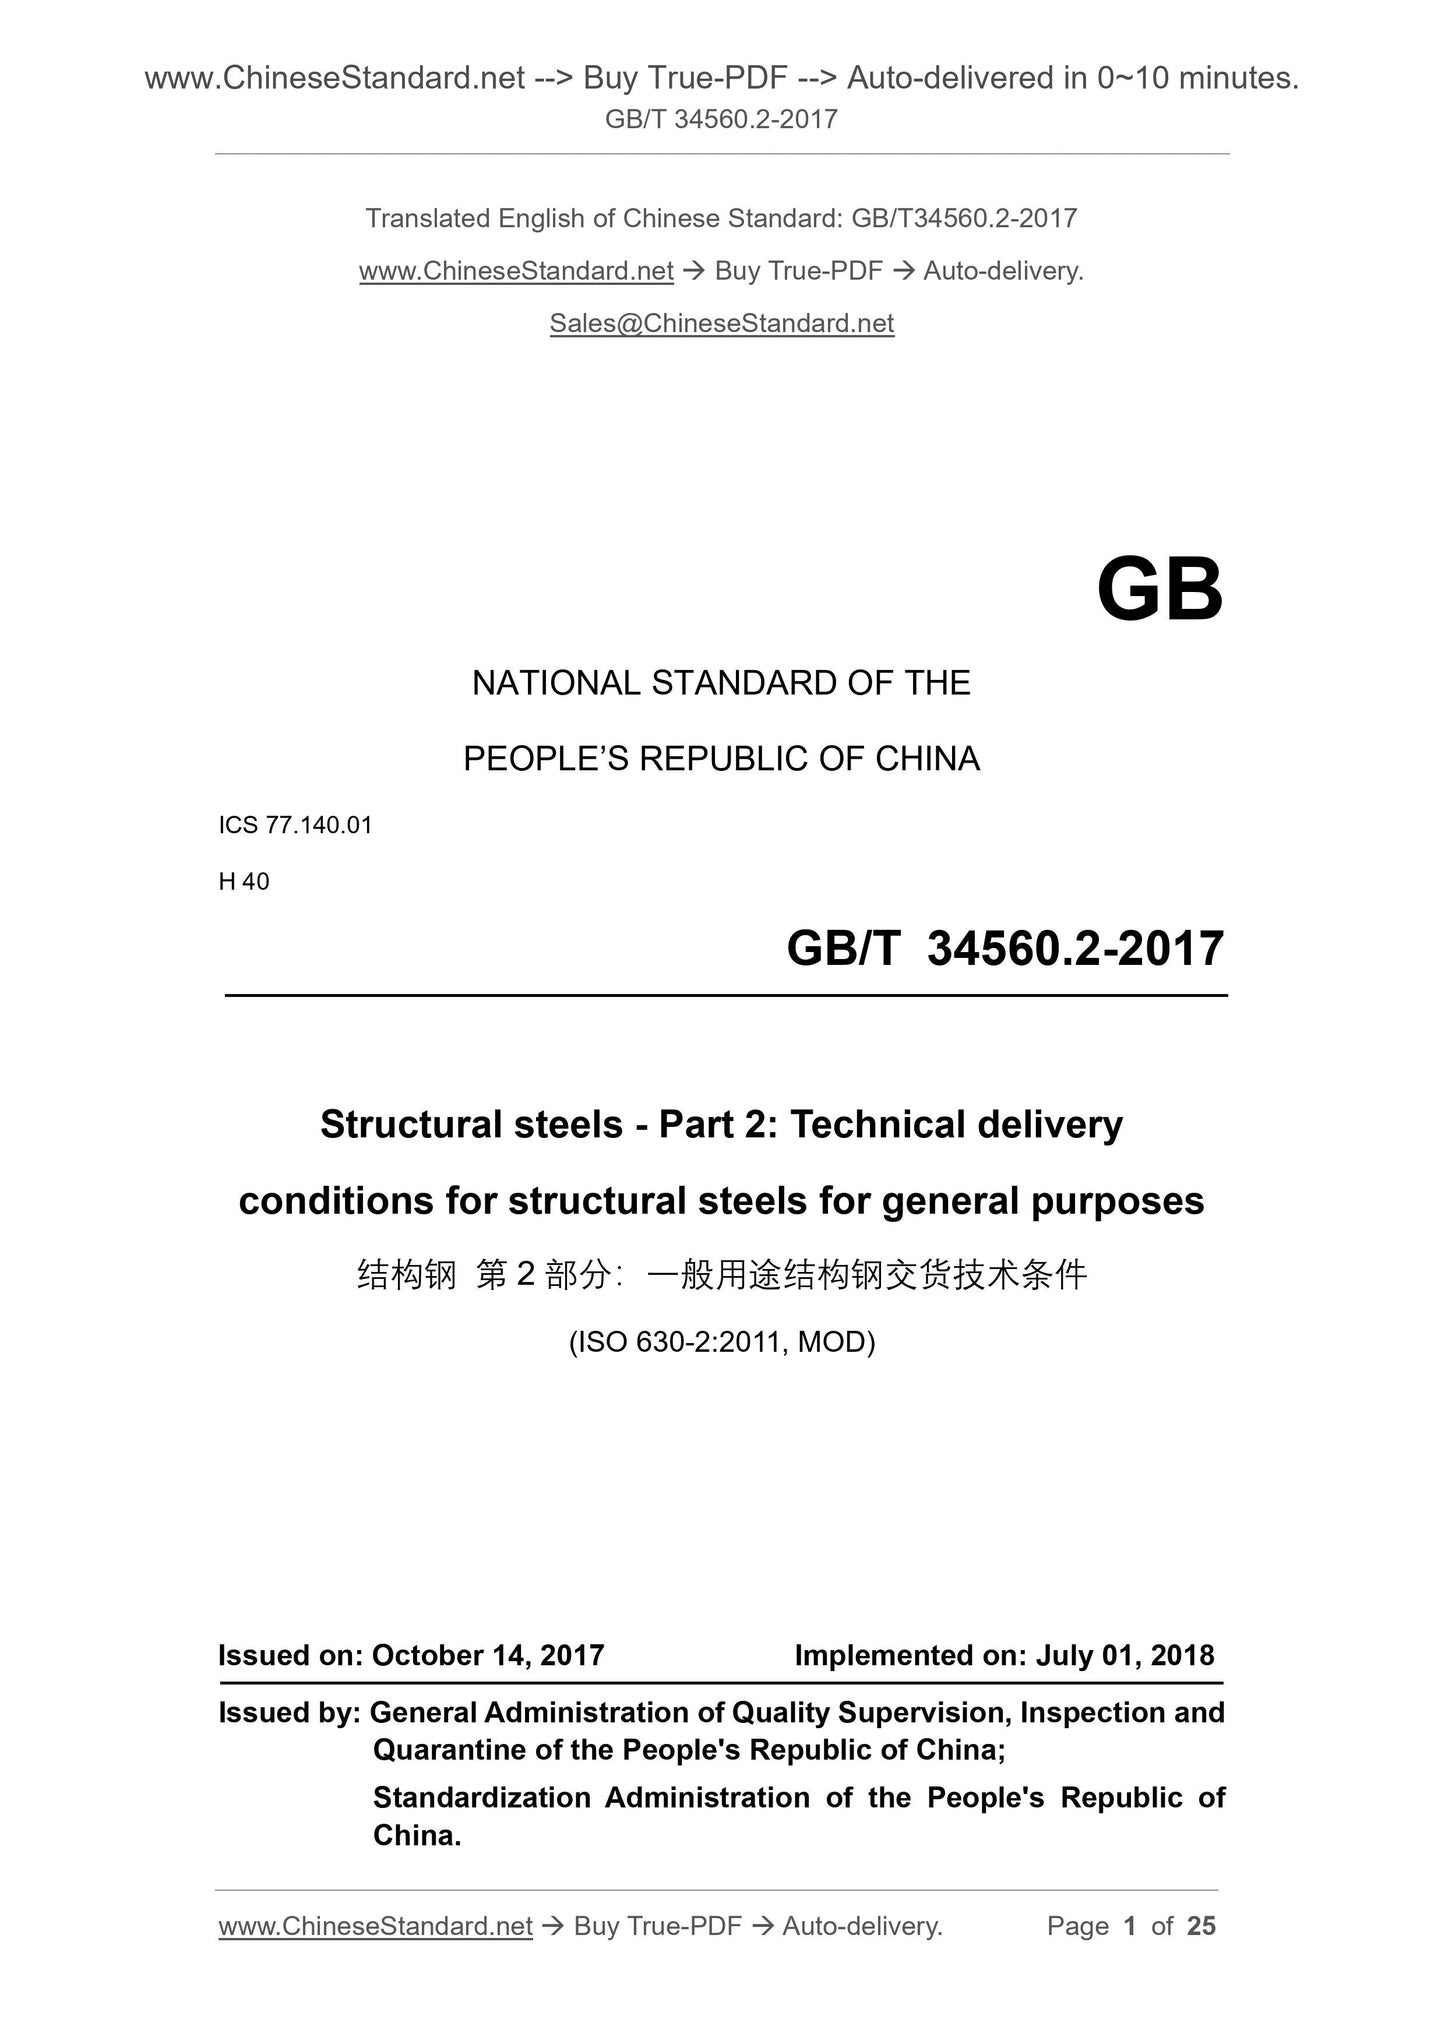 GB/T 34560.2-2017 Page 1